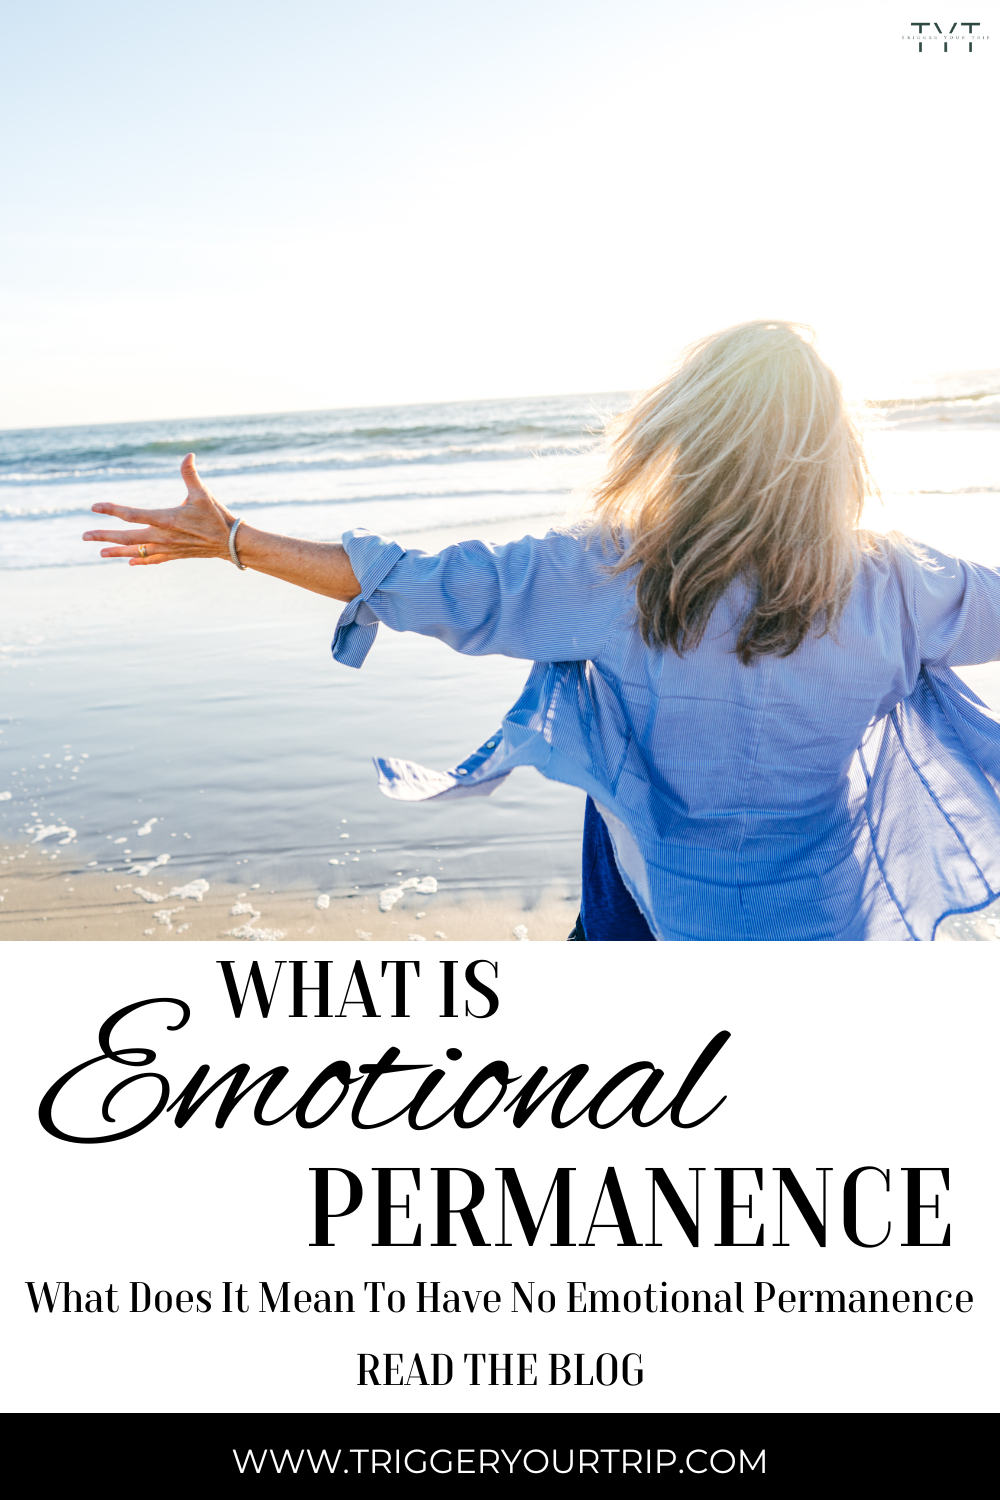 what does it mean to have a lack of emotionak permanence and how it affects both your sense of self and intimacy